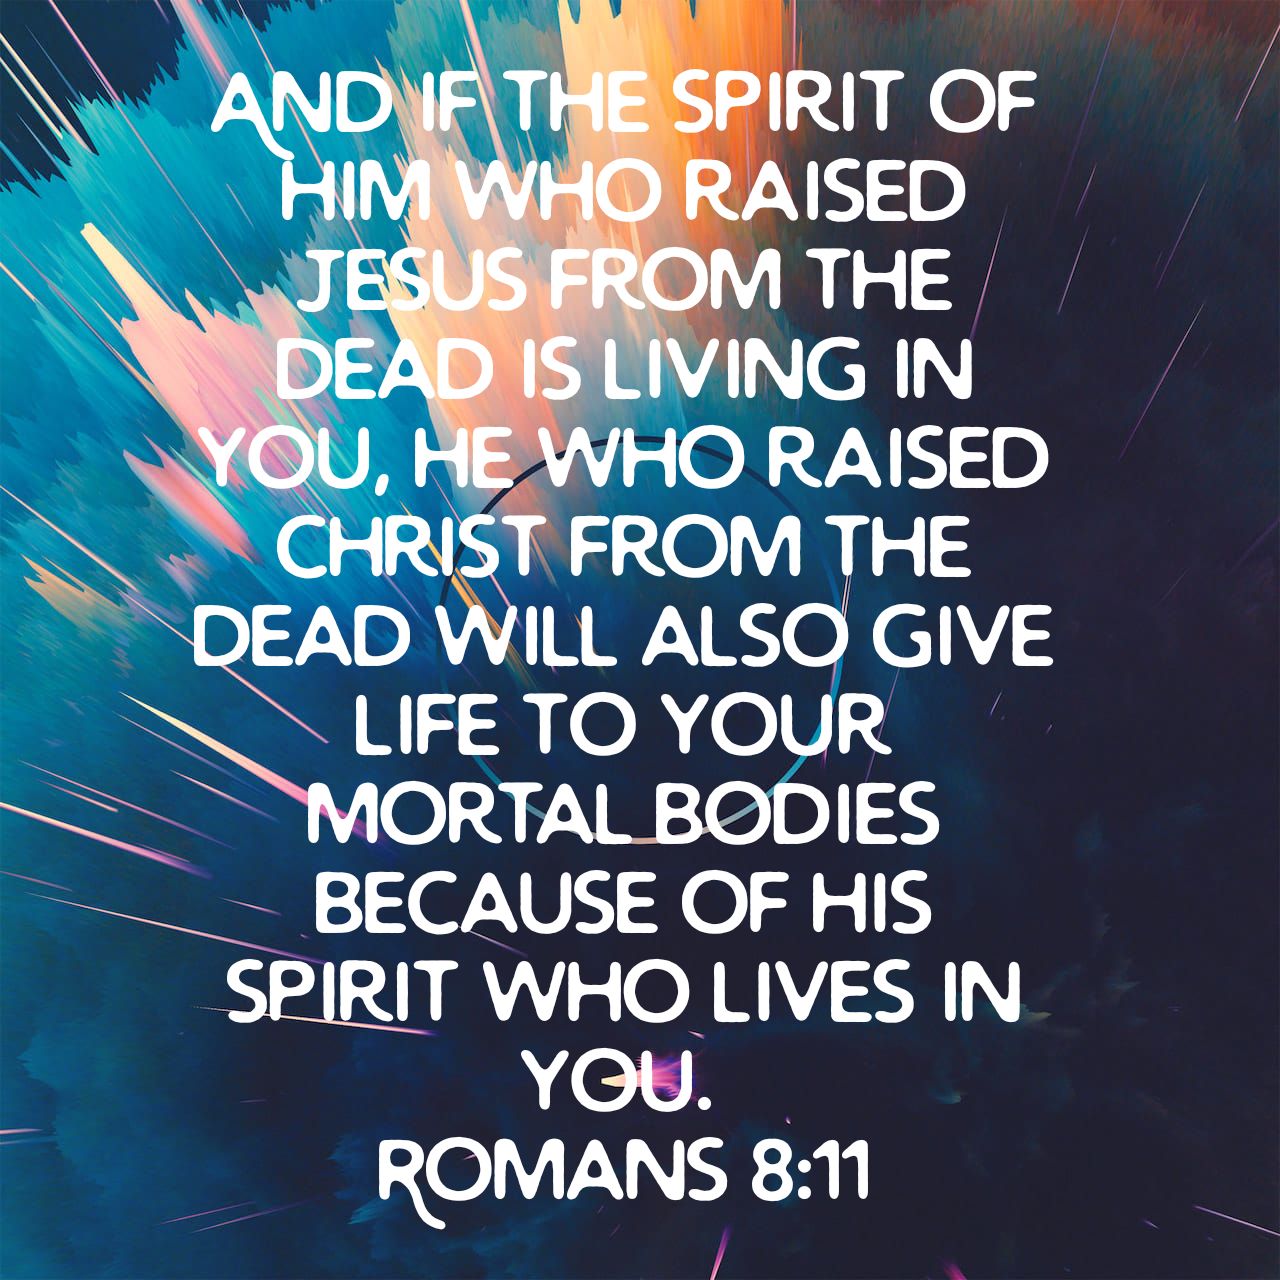 Gus Juhlin on X: "And if the Spirit of him who raised Jesus from the dead is living in you, he who raised Christ from the dead will also give life to